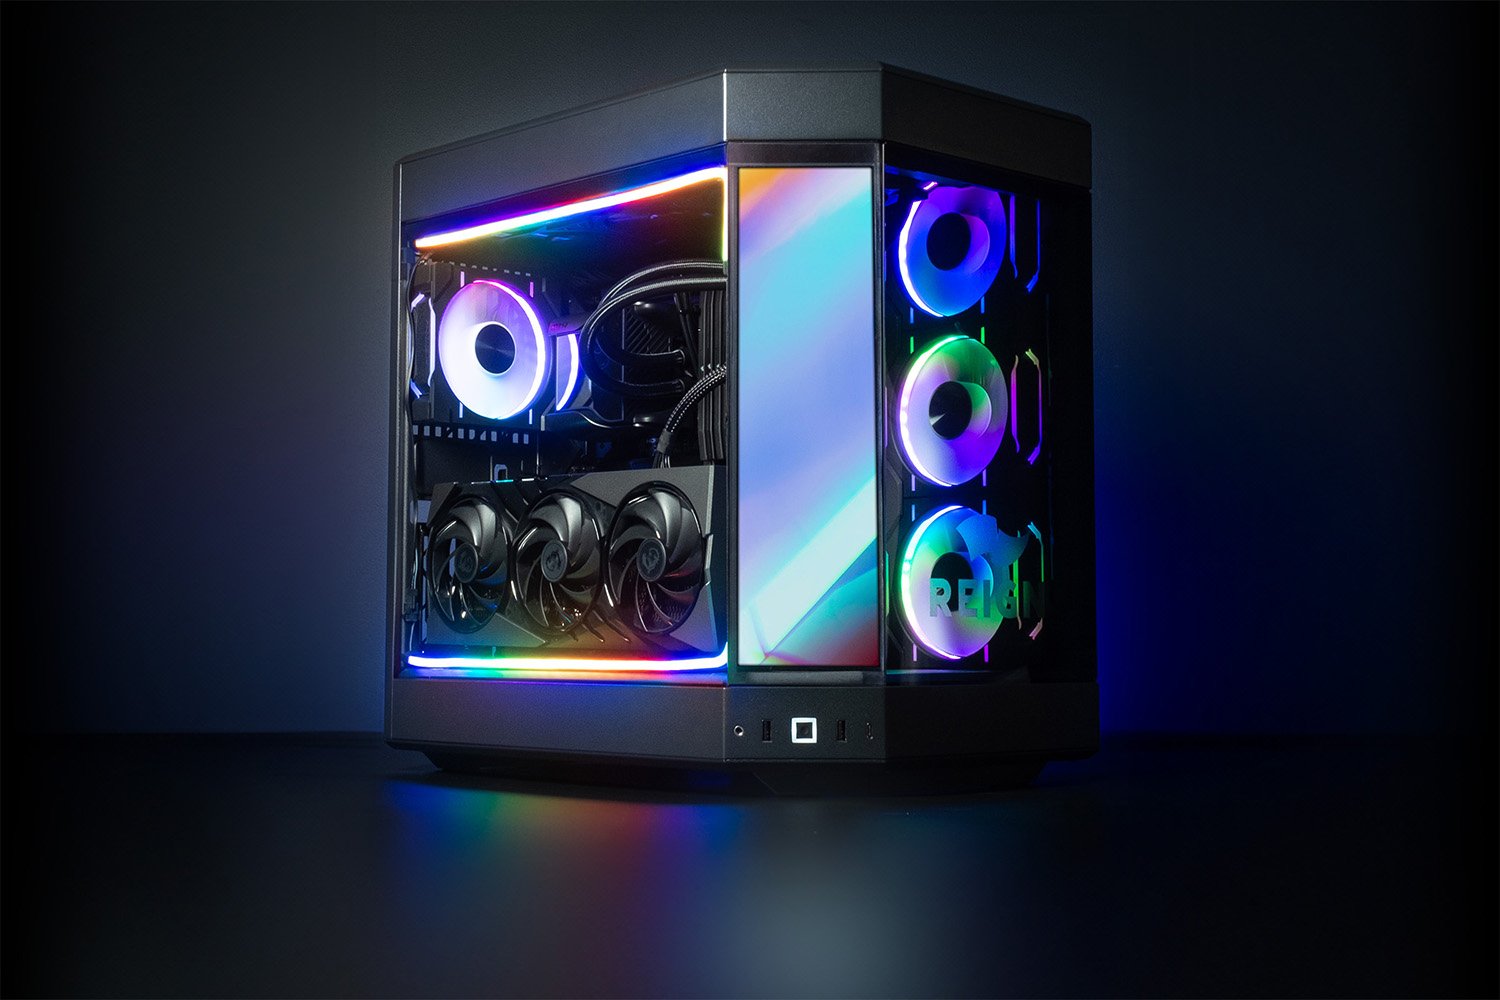 Reign Sentry gaming PCs by Novatech